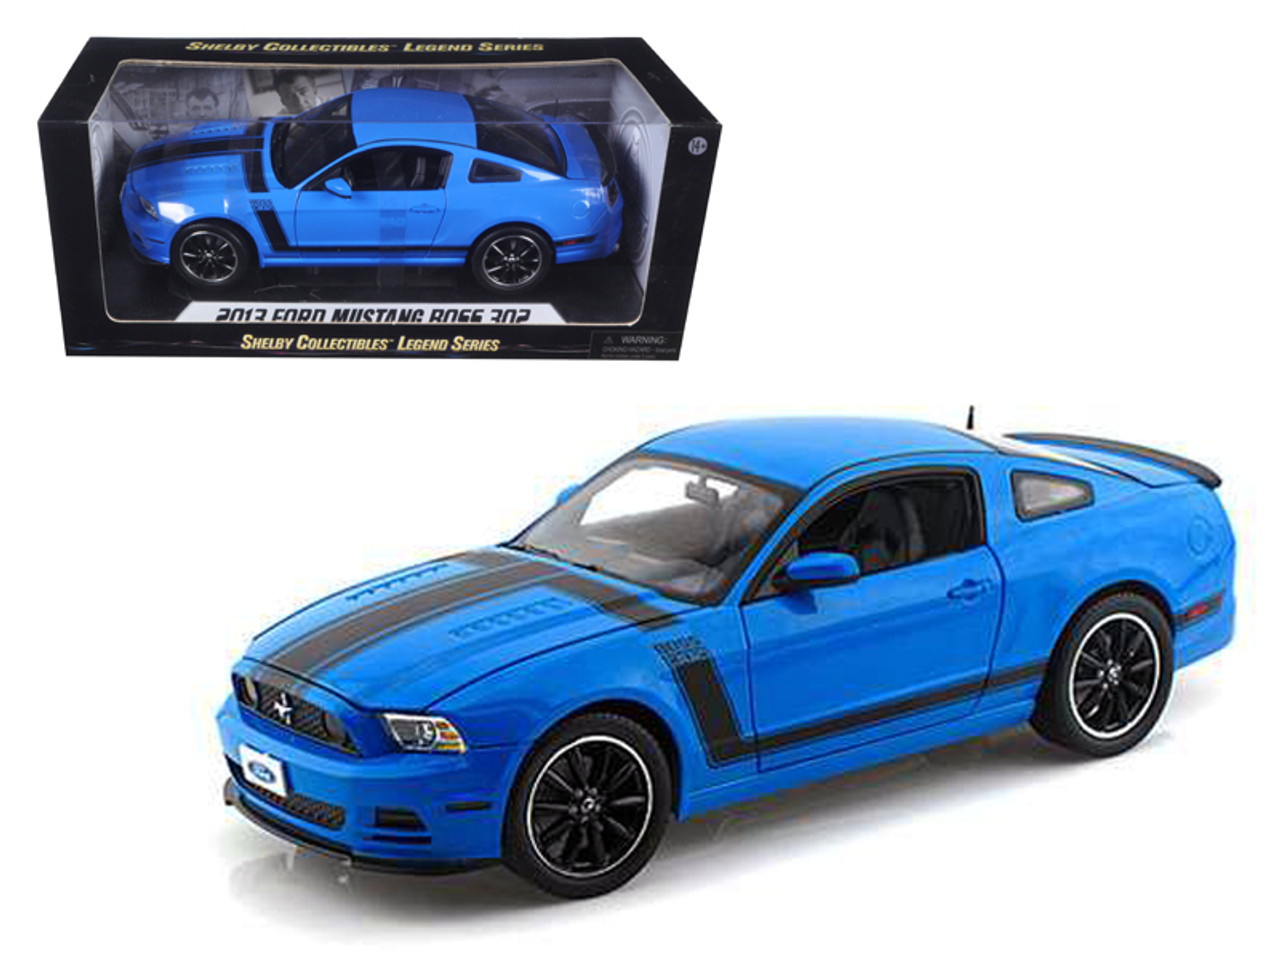 2013 FORD MUSTANG BOSS 302 1/18 DIECAST CAR MODEL BY SHELBY COLLECTIBLES SC452 